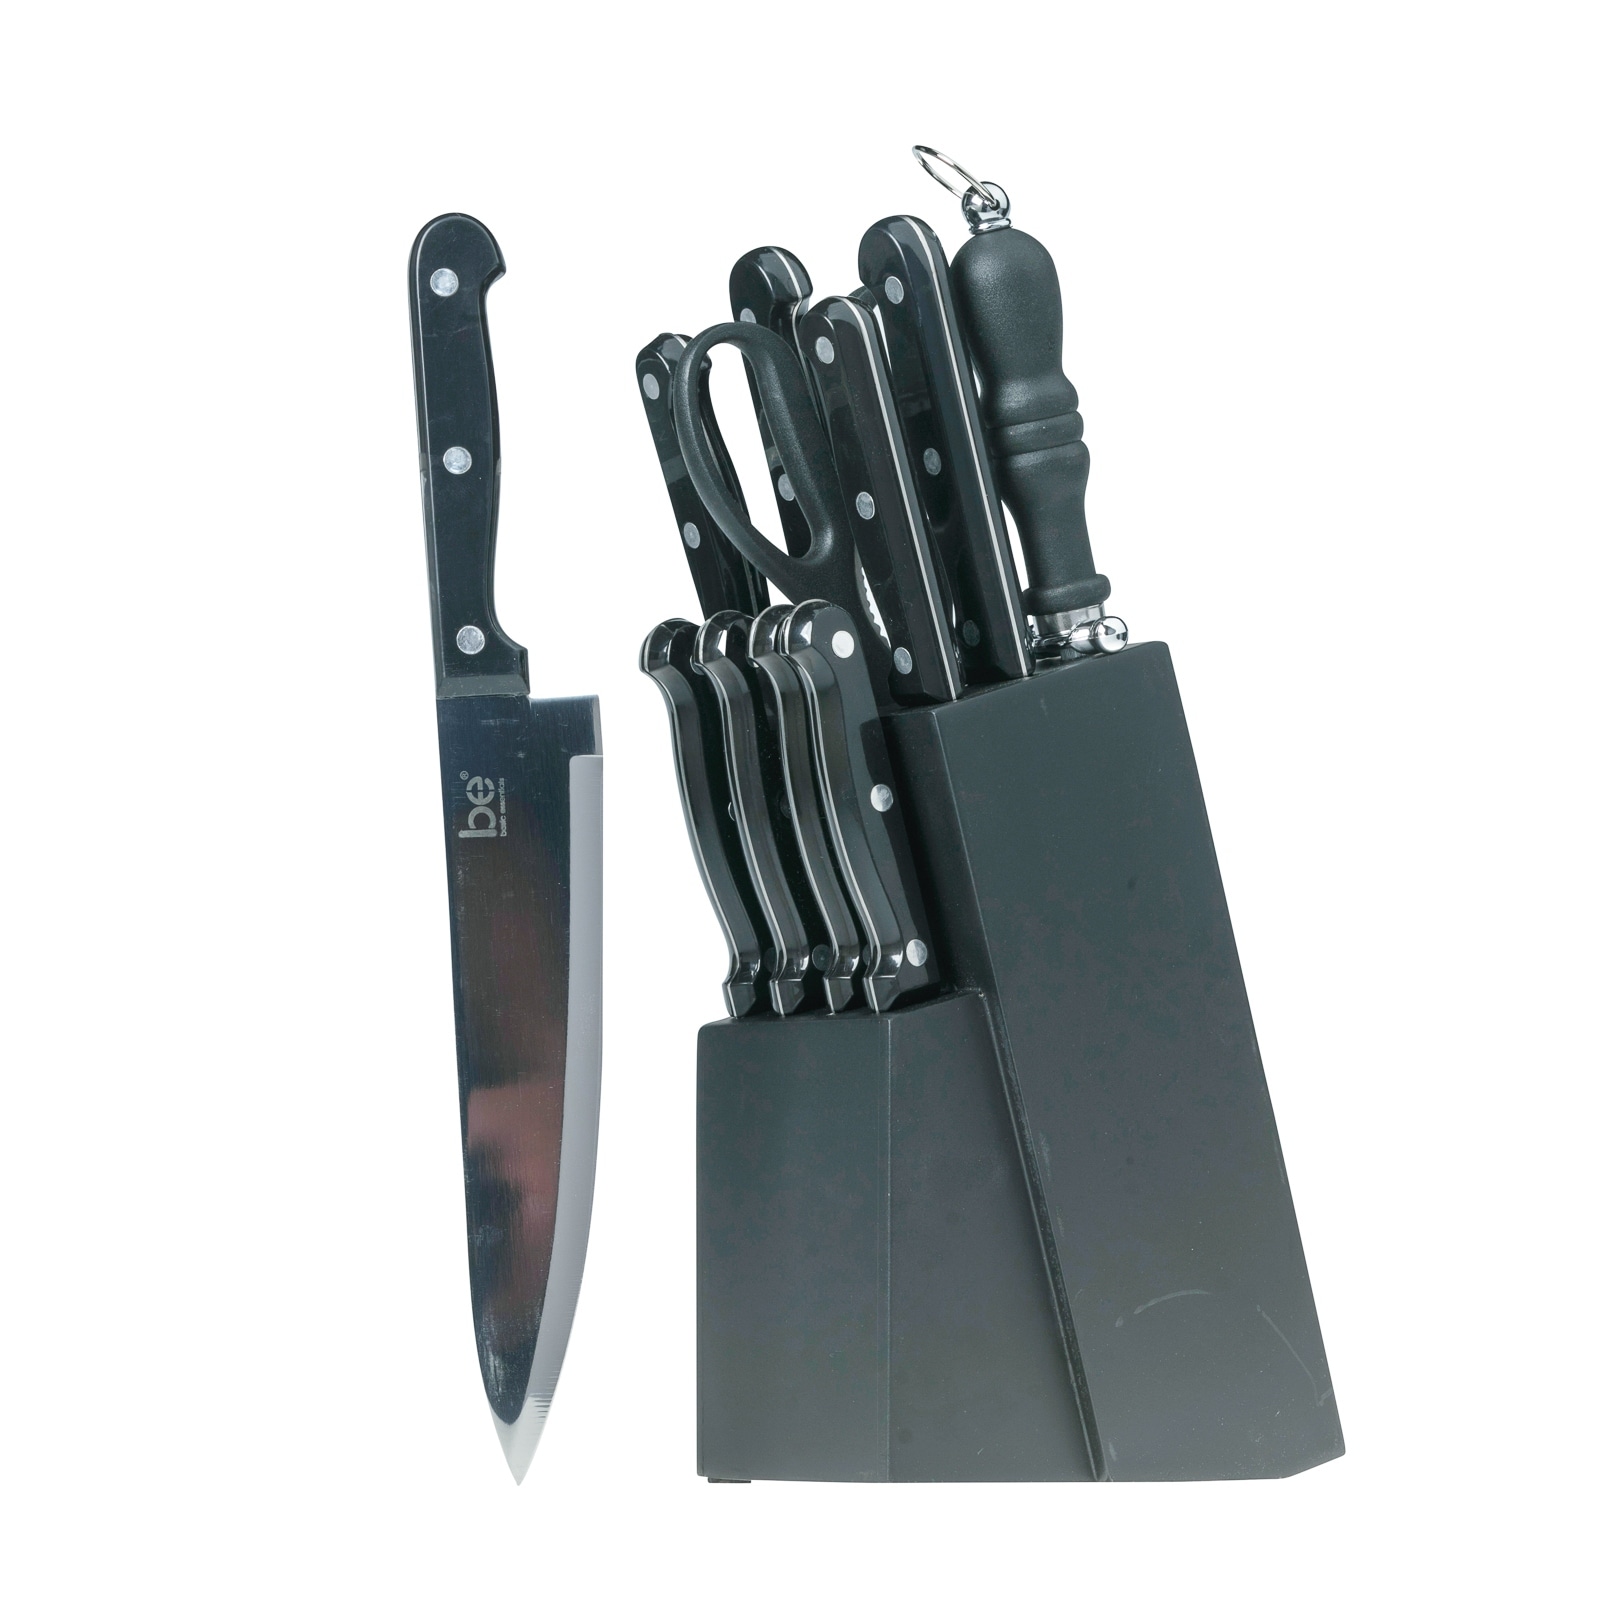 https://ak1.ostkcdn.com/images/products/is/images/direct/c6a74b292e831cede97392854b2ee5bf33aaddd0/Basic-Essentials-12PC-Black-Cutlery-Set-with-Block.jpg